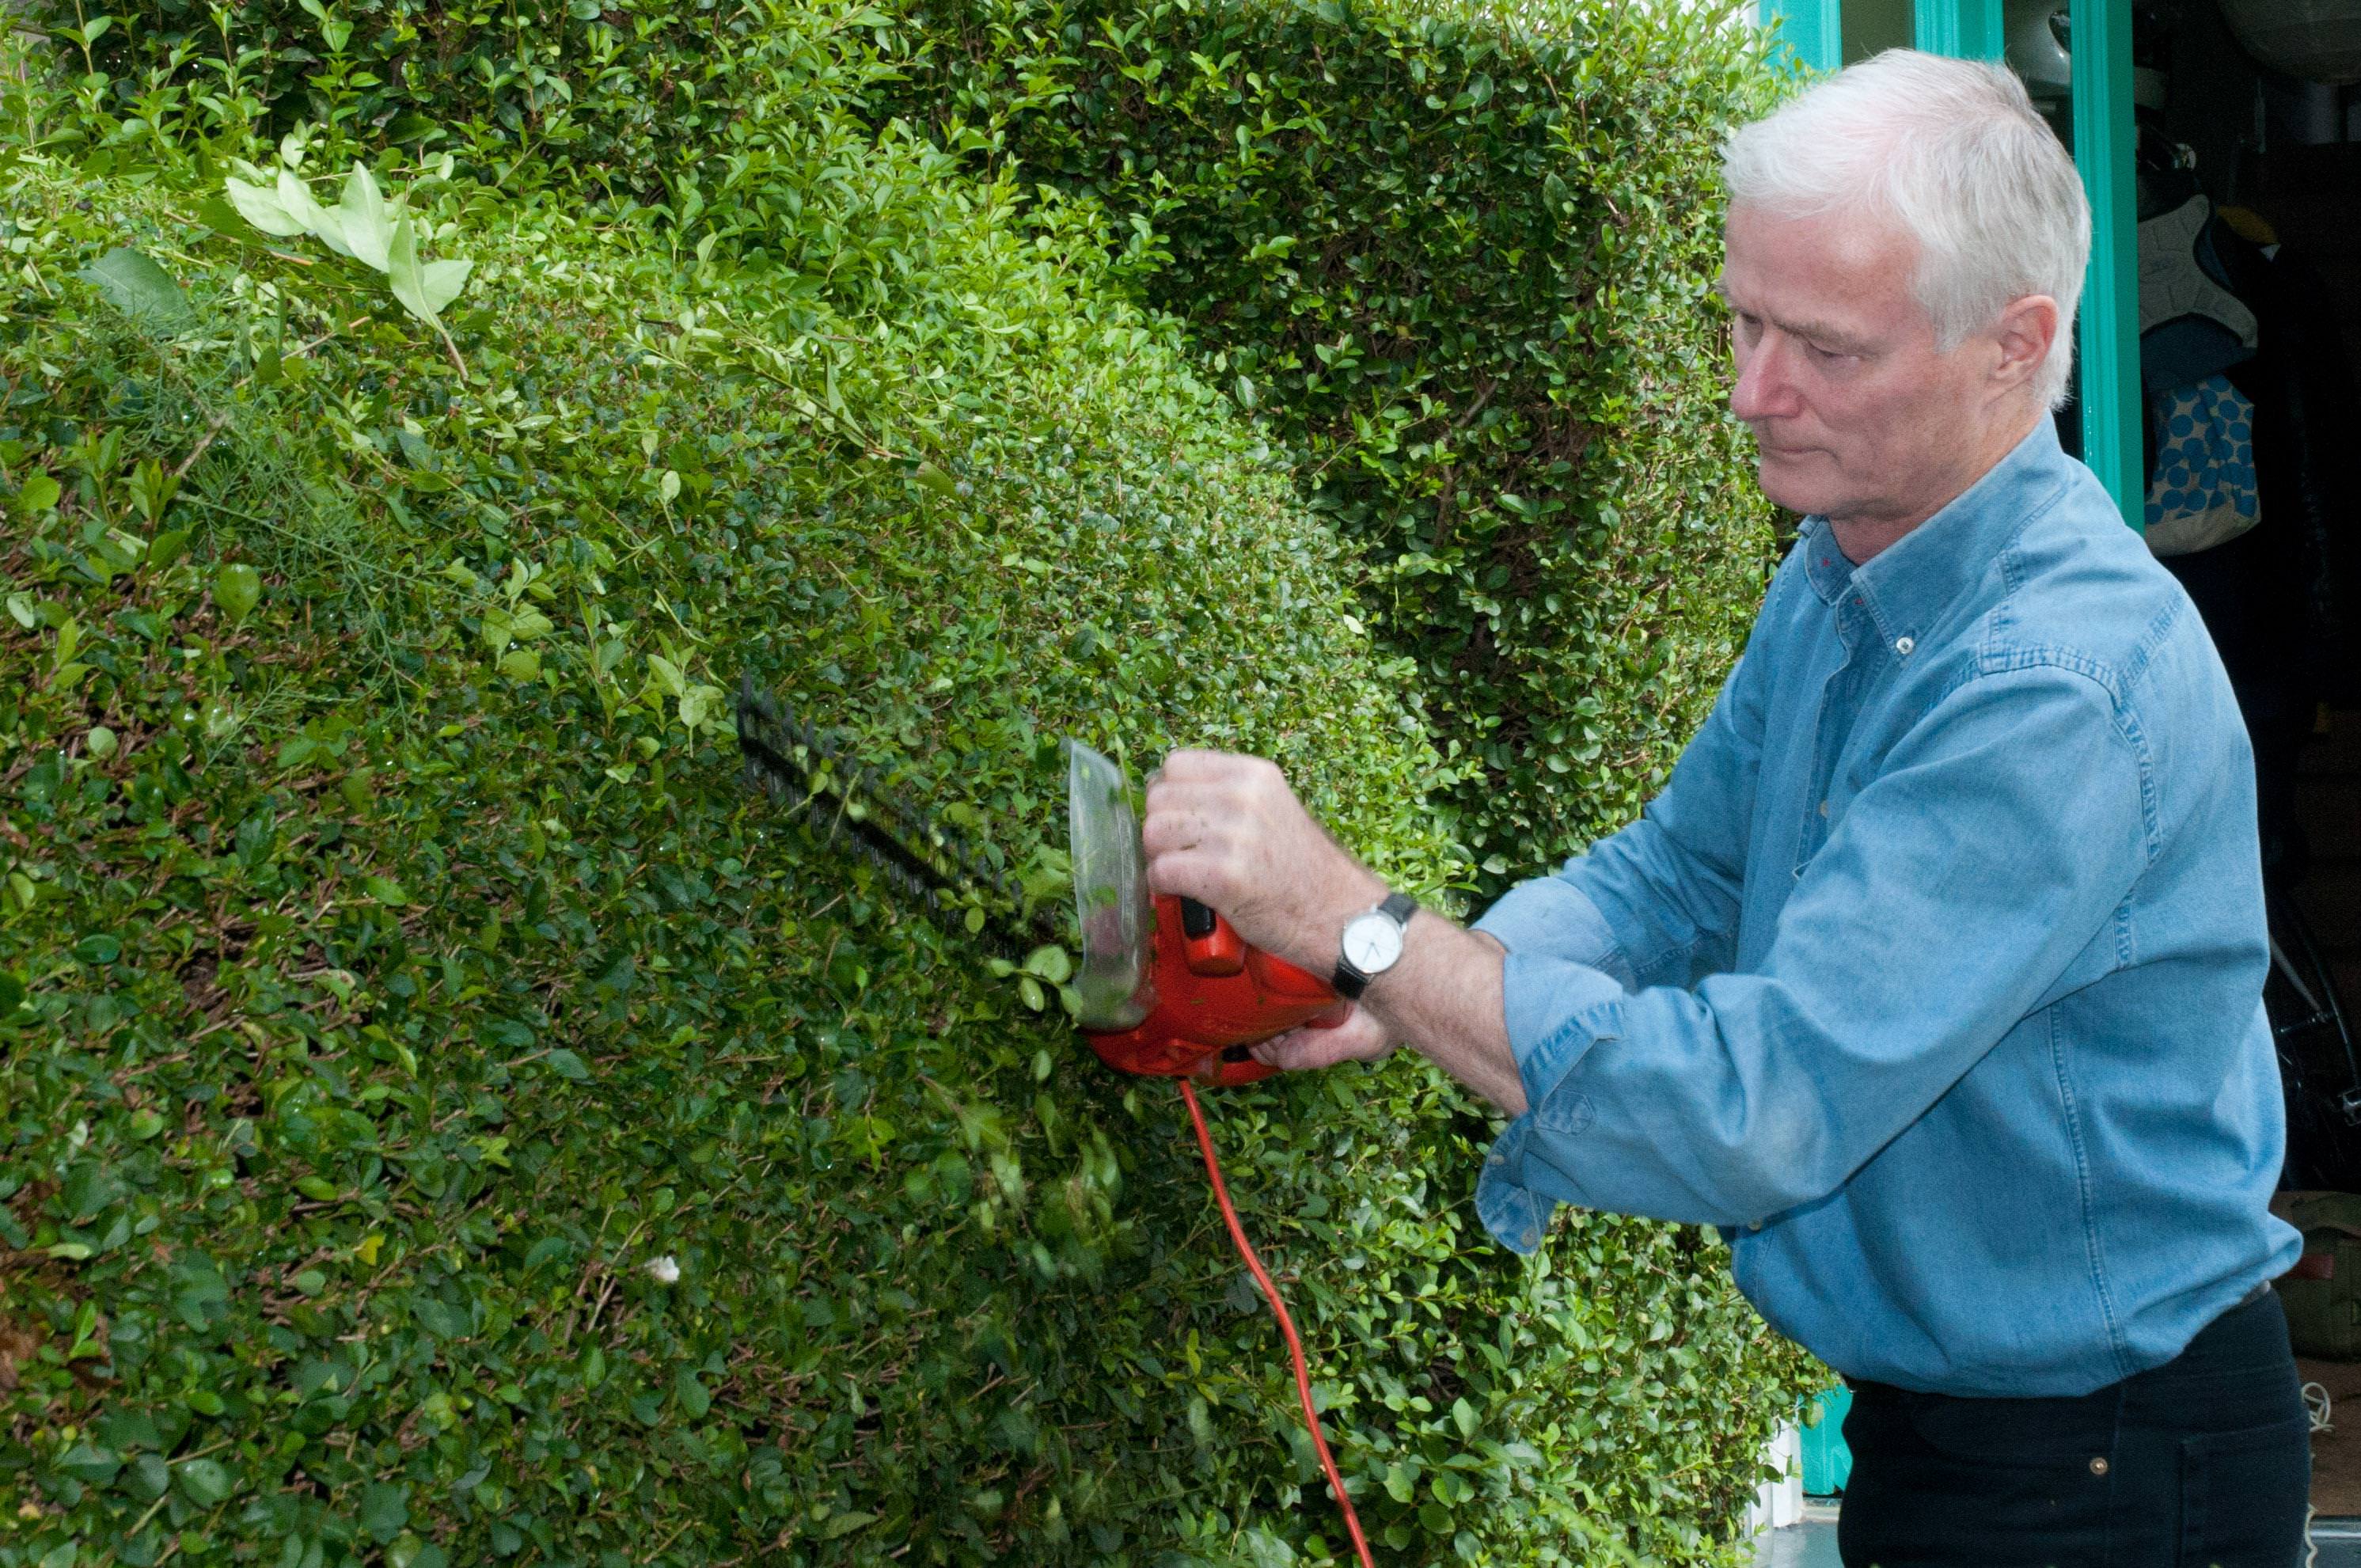 How to Trim Hedges Correctly